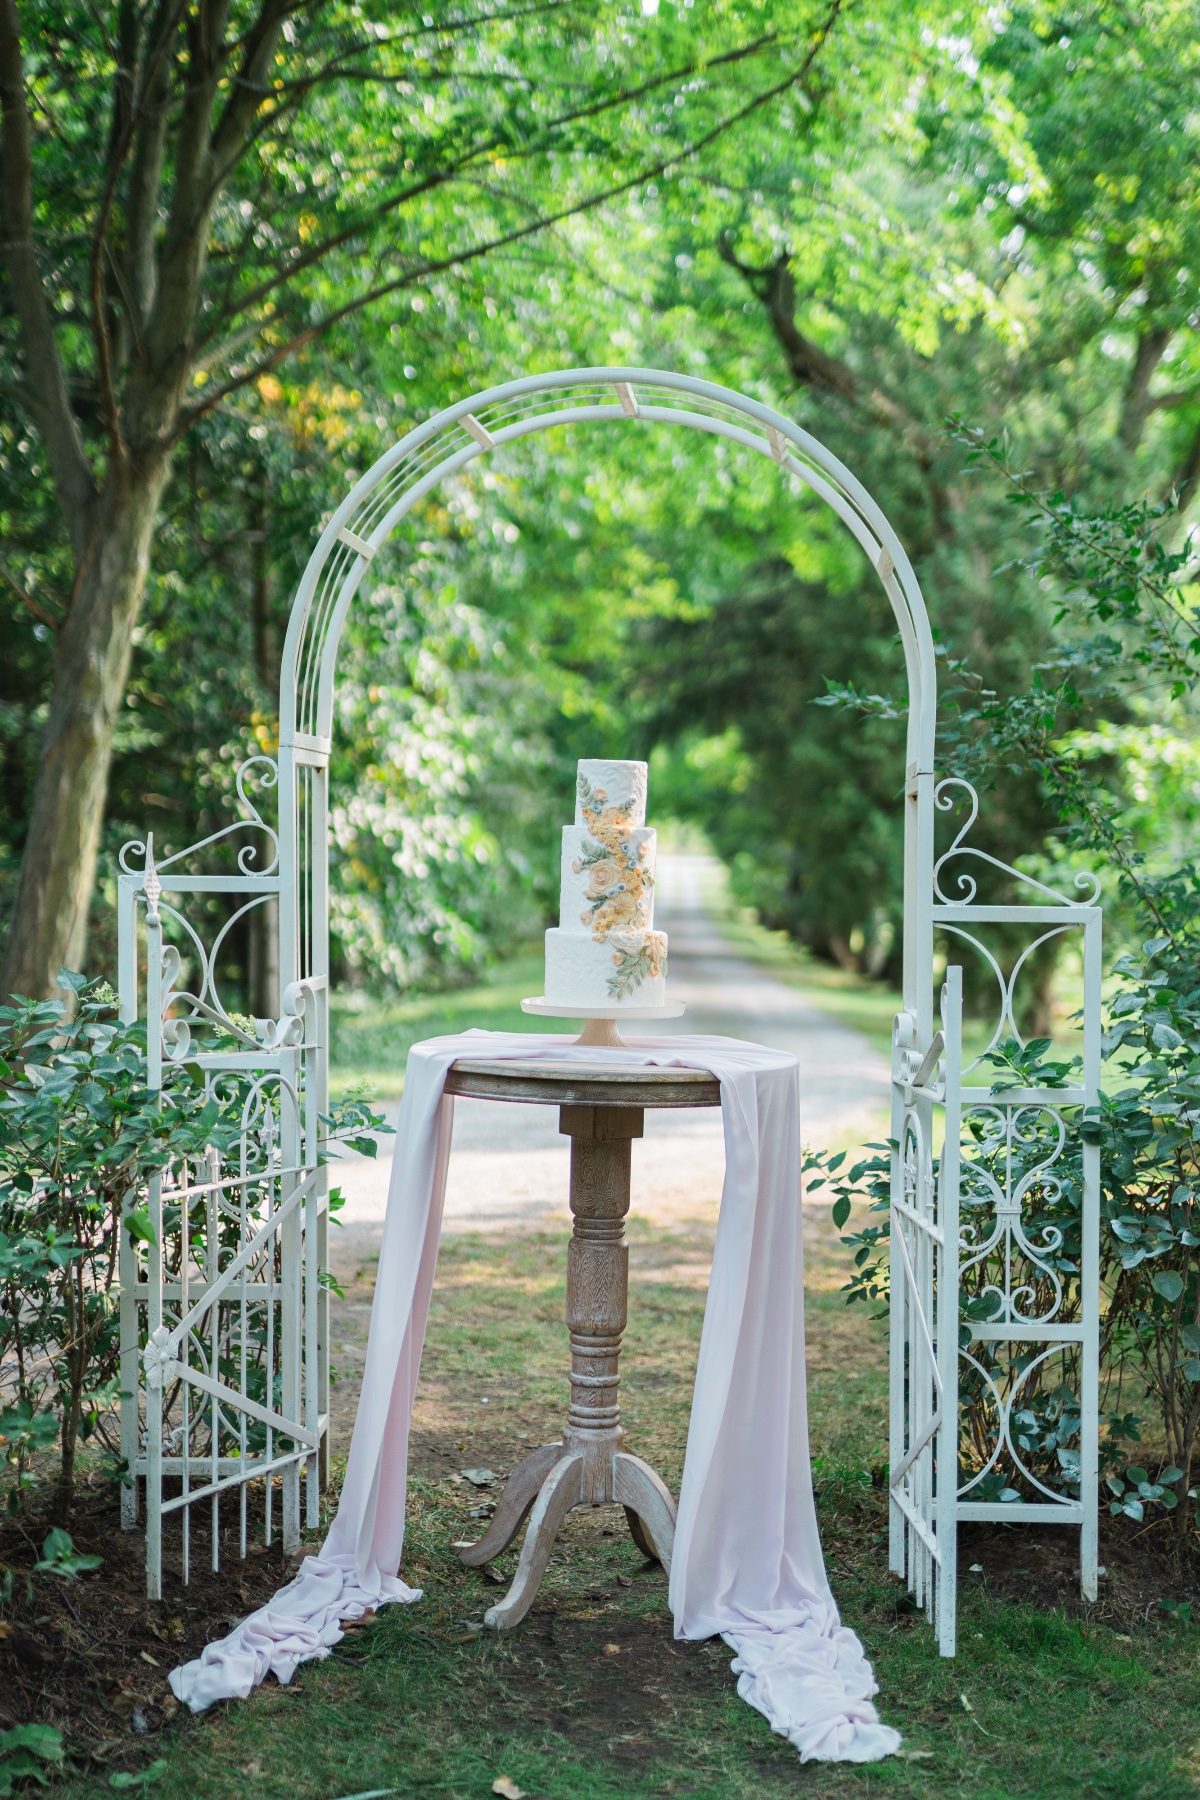 Geometric Orchard Wedding with Pink and Orange Flowers